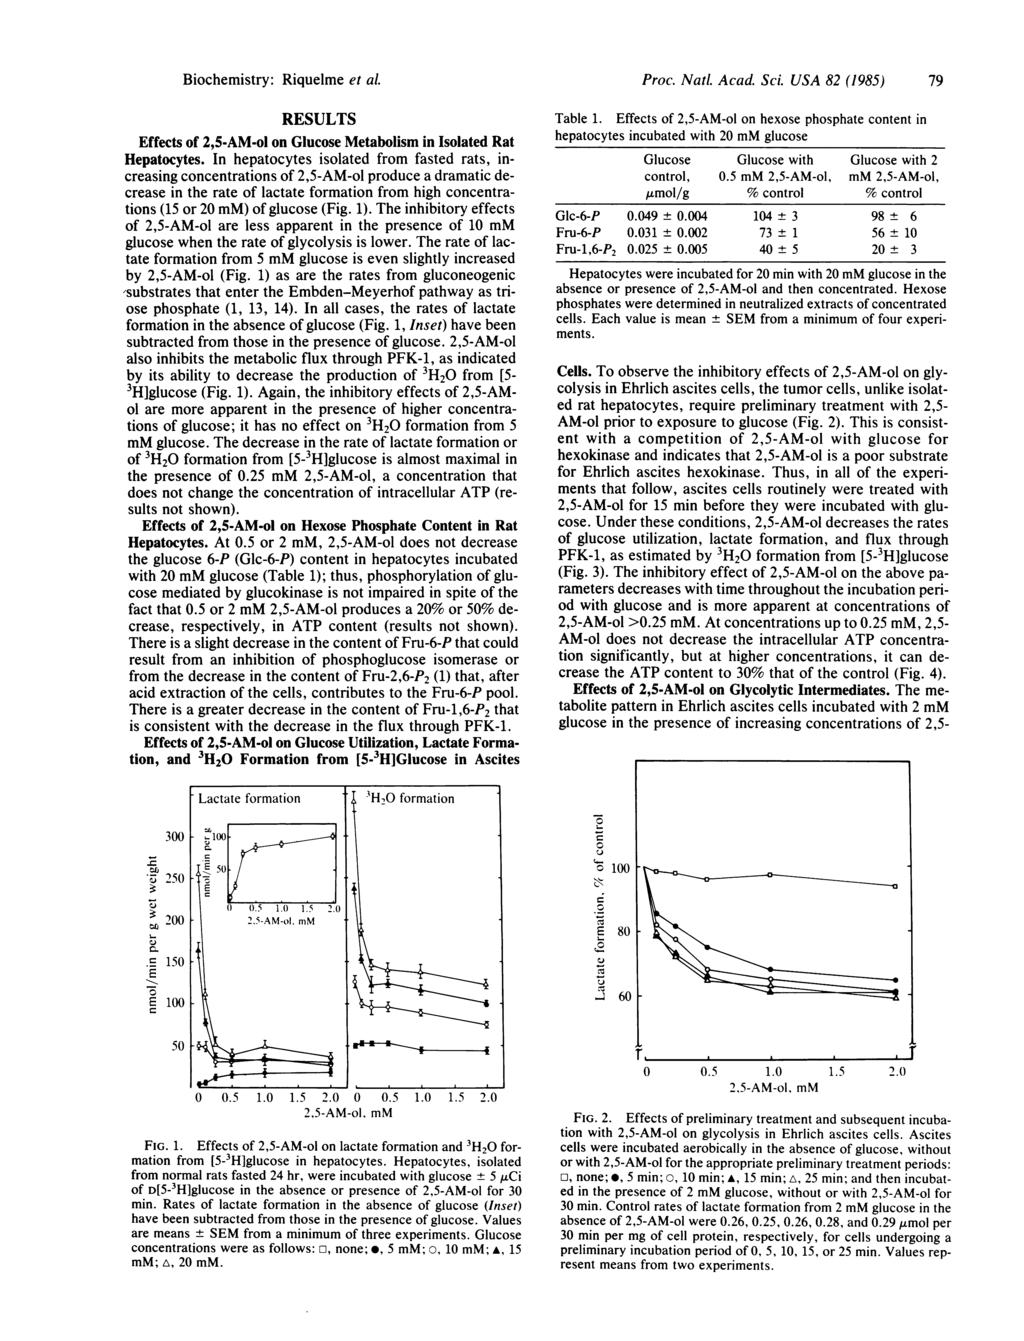 Biochemistry: Riquelme et al Proc. Natl. Acad Sci. USA 82 (1985) 79 RESULTS Effects of 2,5-AM-ol on Glucose Metabolism in Isolated Rat Hepatocytes.